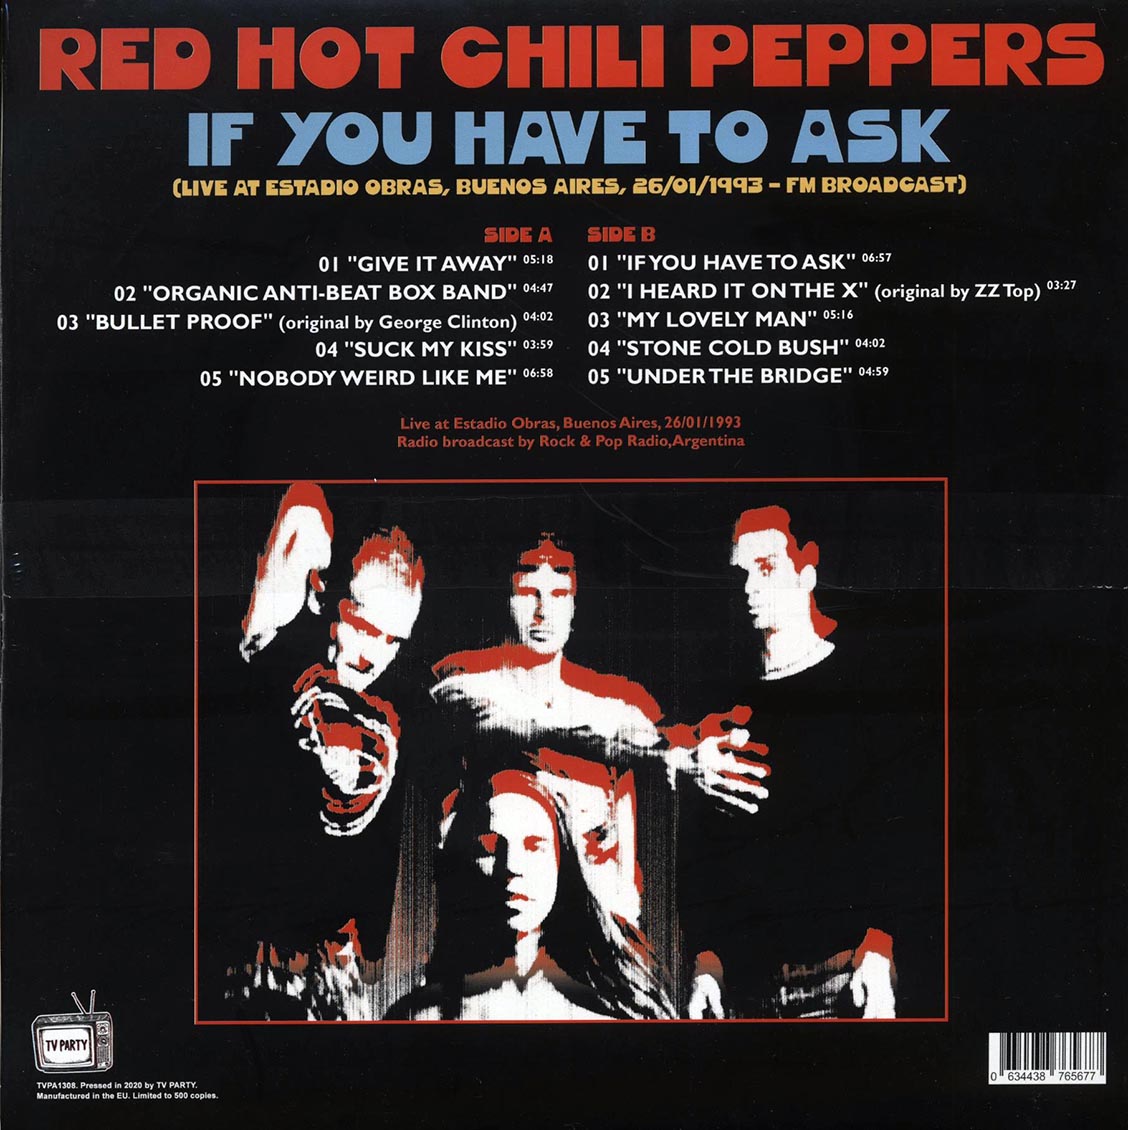 Red Hot Chili Peppers - If You Have To Ask: Live At Estadio Obras, Buenos Aires, 26/01/1993 FM Broadcast